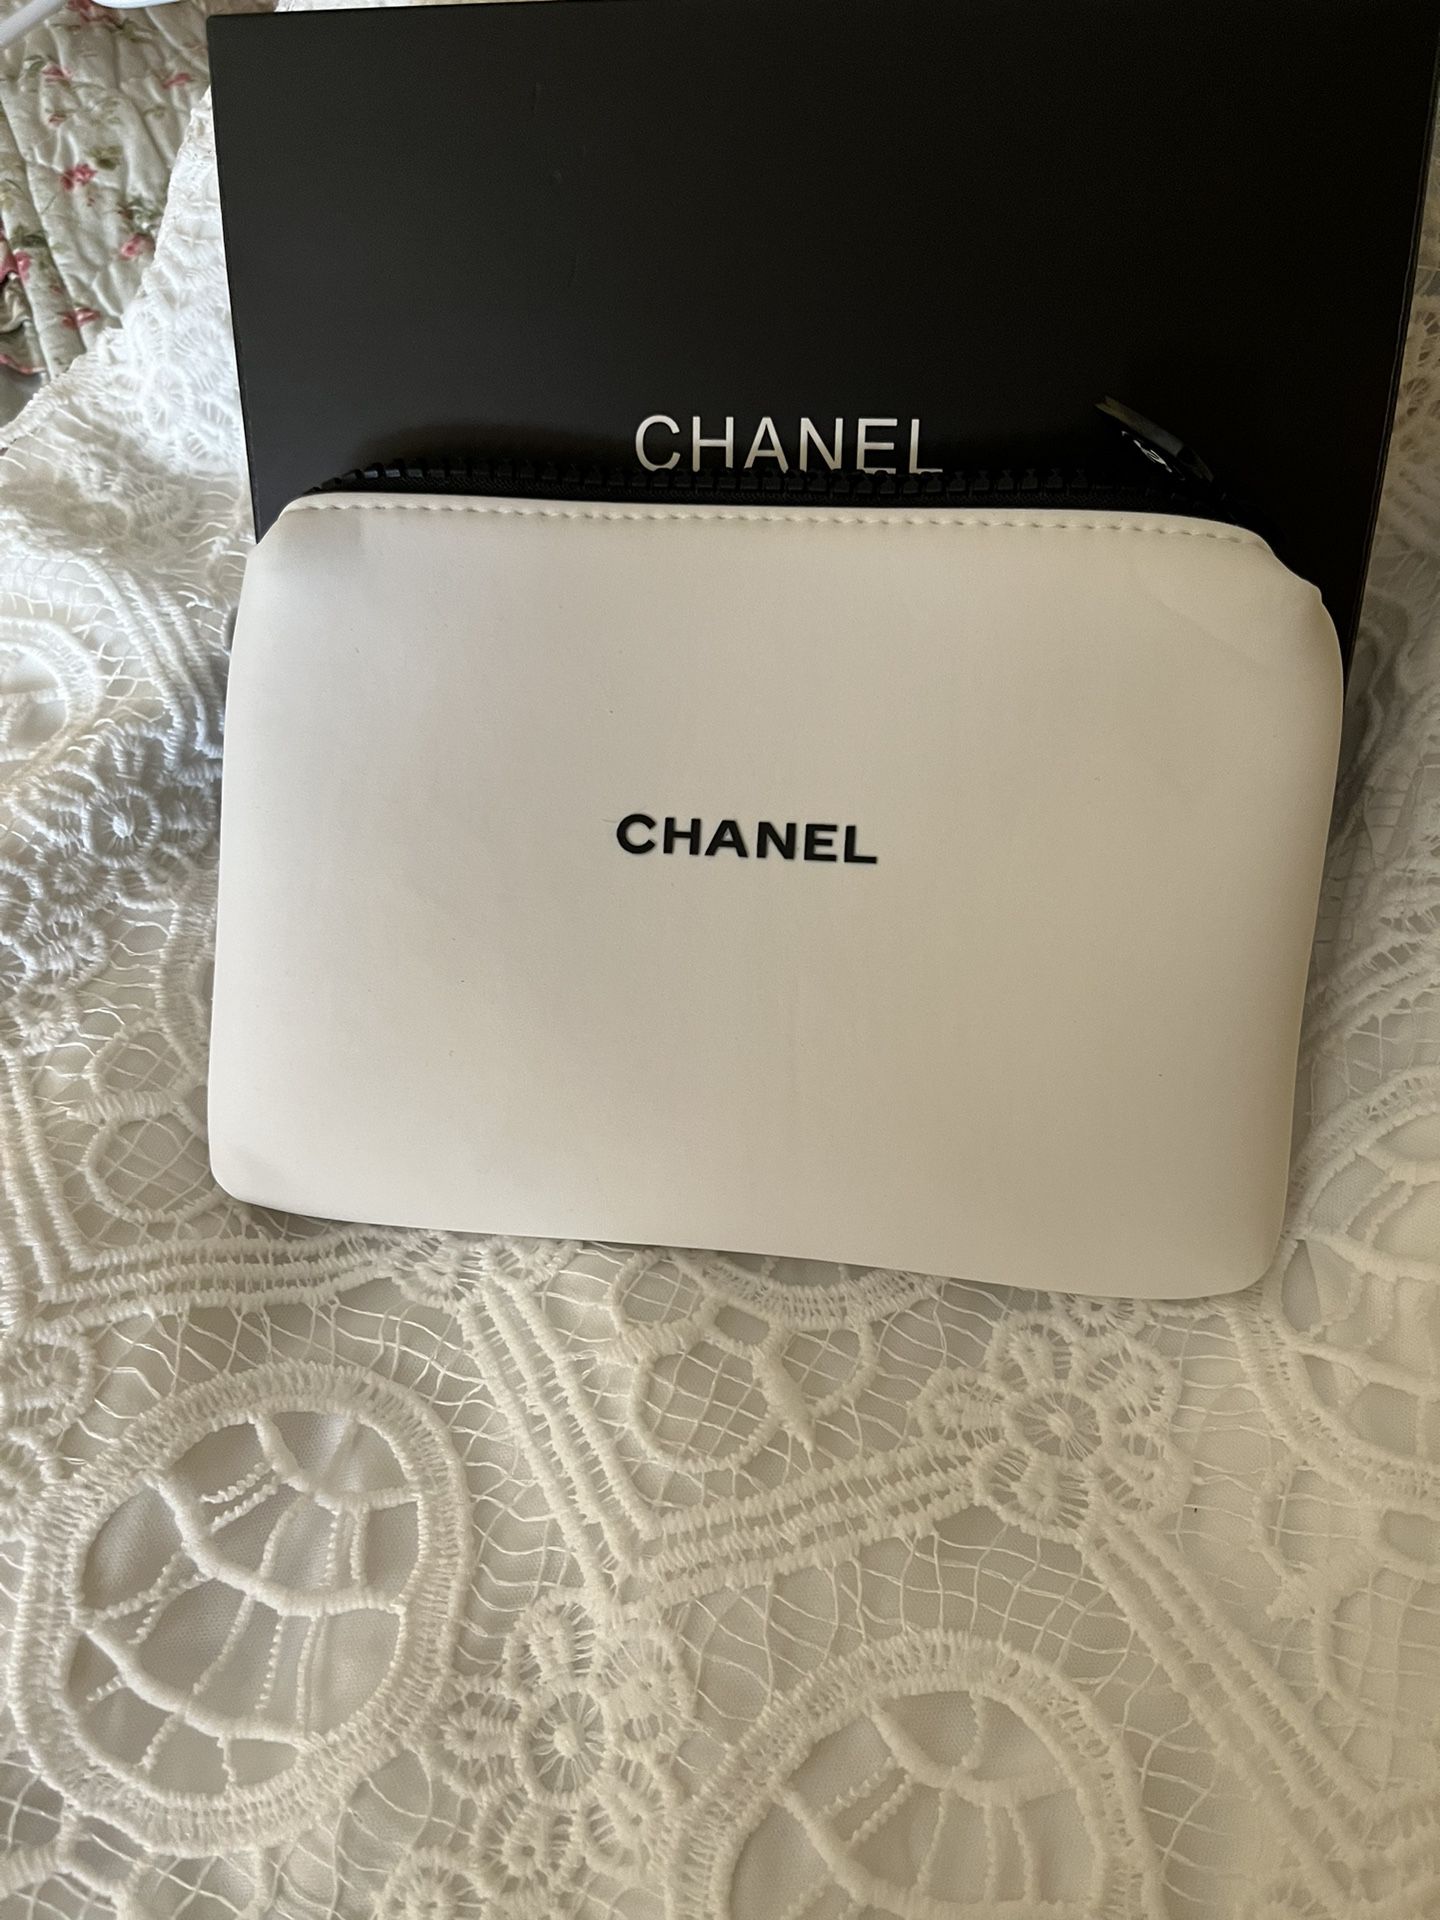 Chanel Makeup Bag for Sale in Tucson, AZ - OfferUp